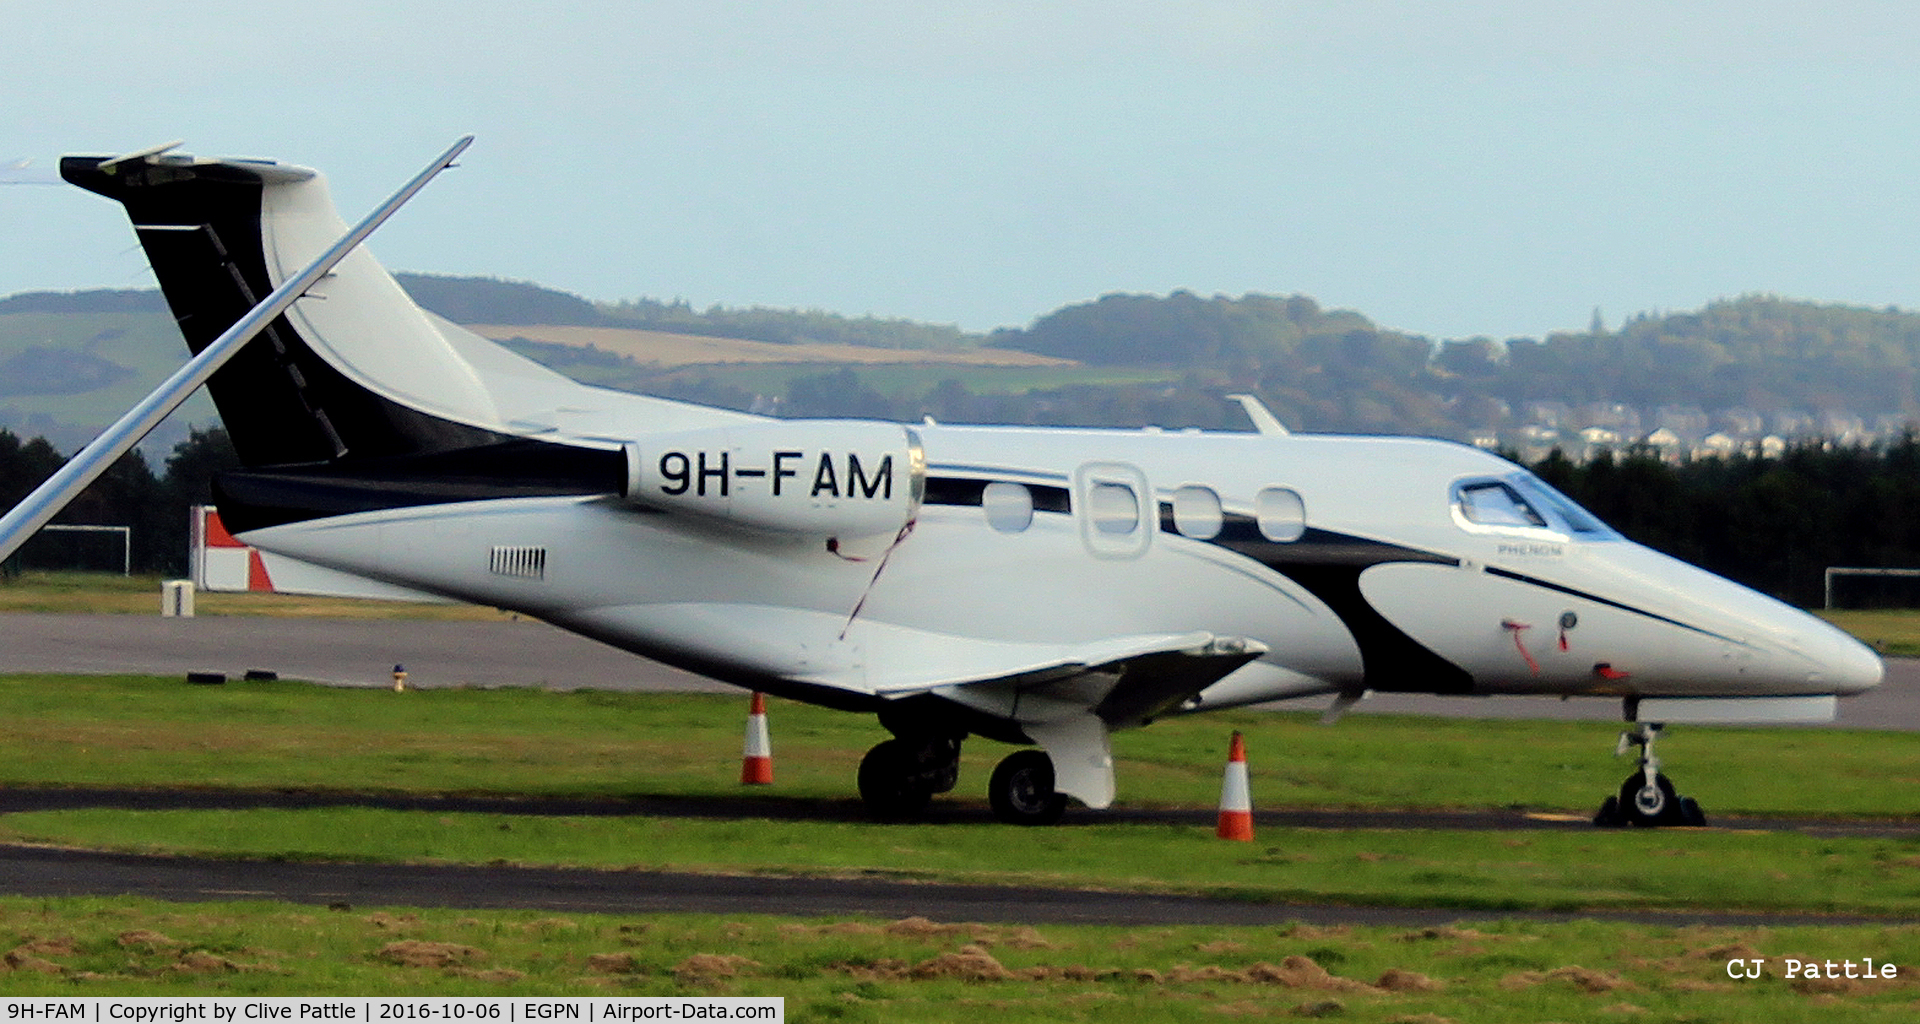 9H-FAM, 2009 Embraer EMB-500 Phenom 100 C/N 50000100, At Dundee Riverside Airport EGPN, slightly obscured,  for the Annual Golf Dunhill Links Championships, held at nearby St Andrews.